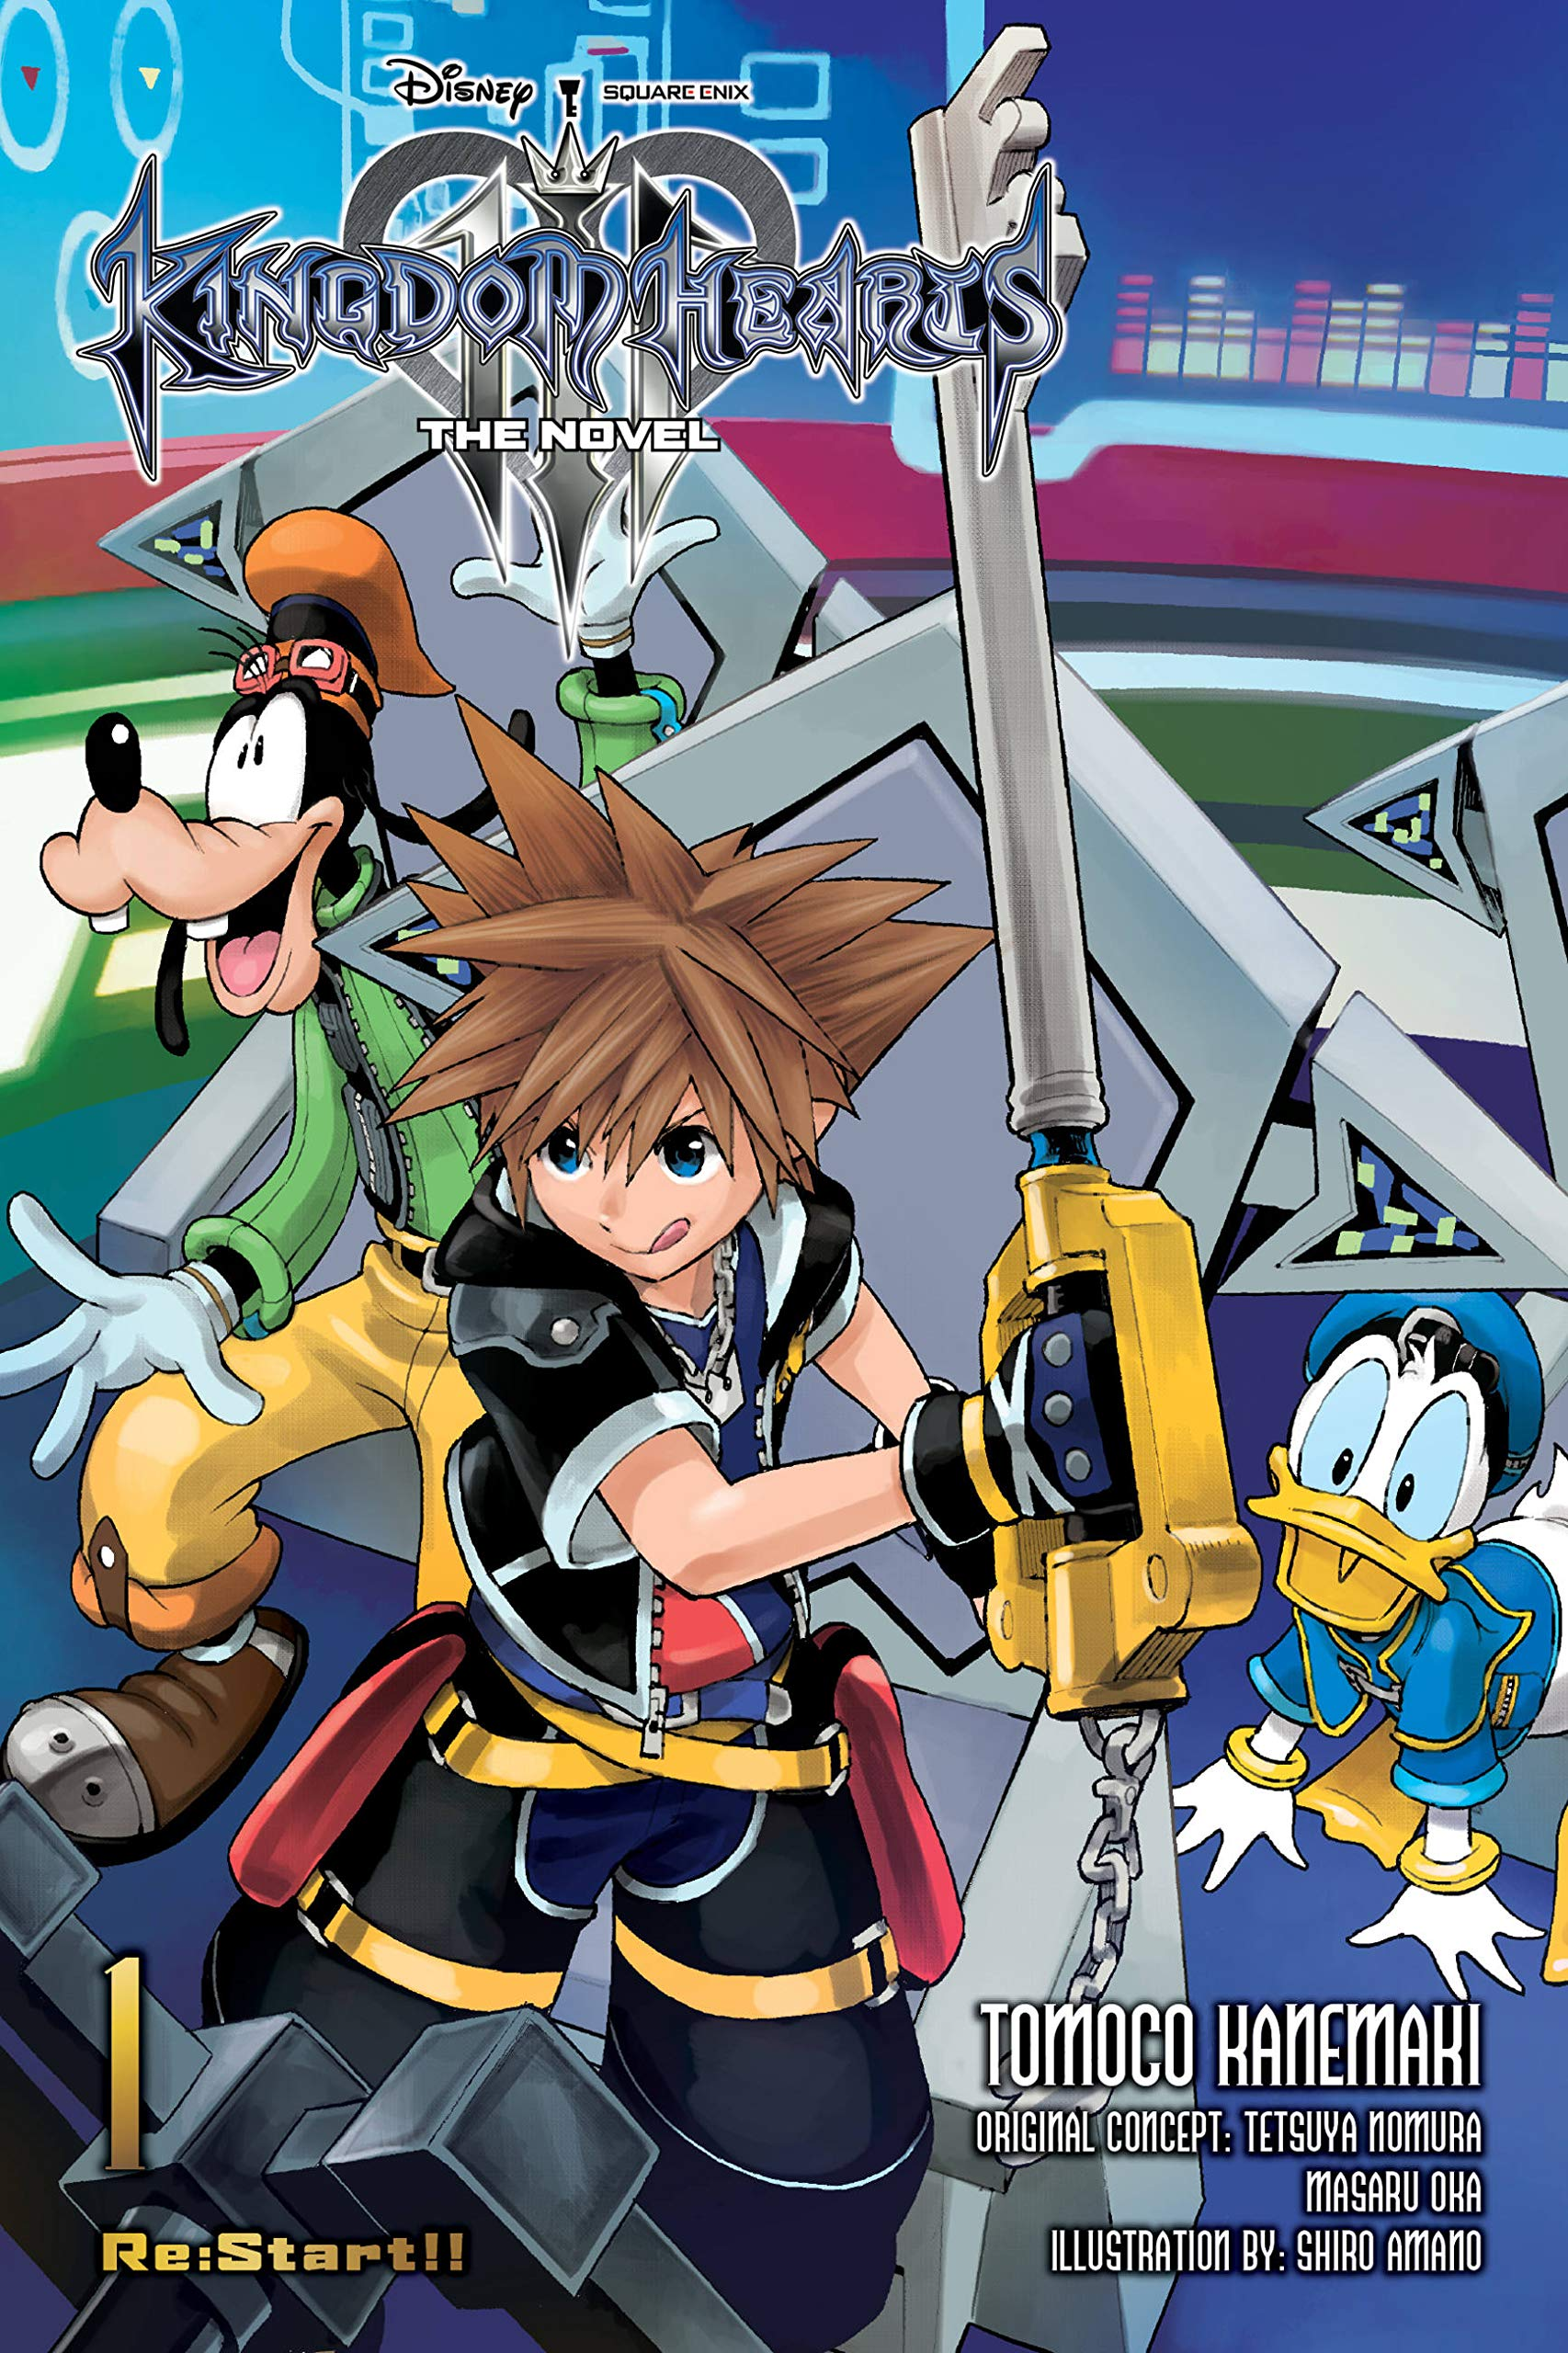 Everything You Need to Know Before Playing Kingdom Hearts III